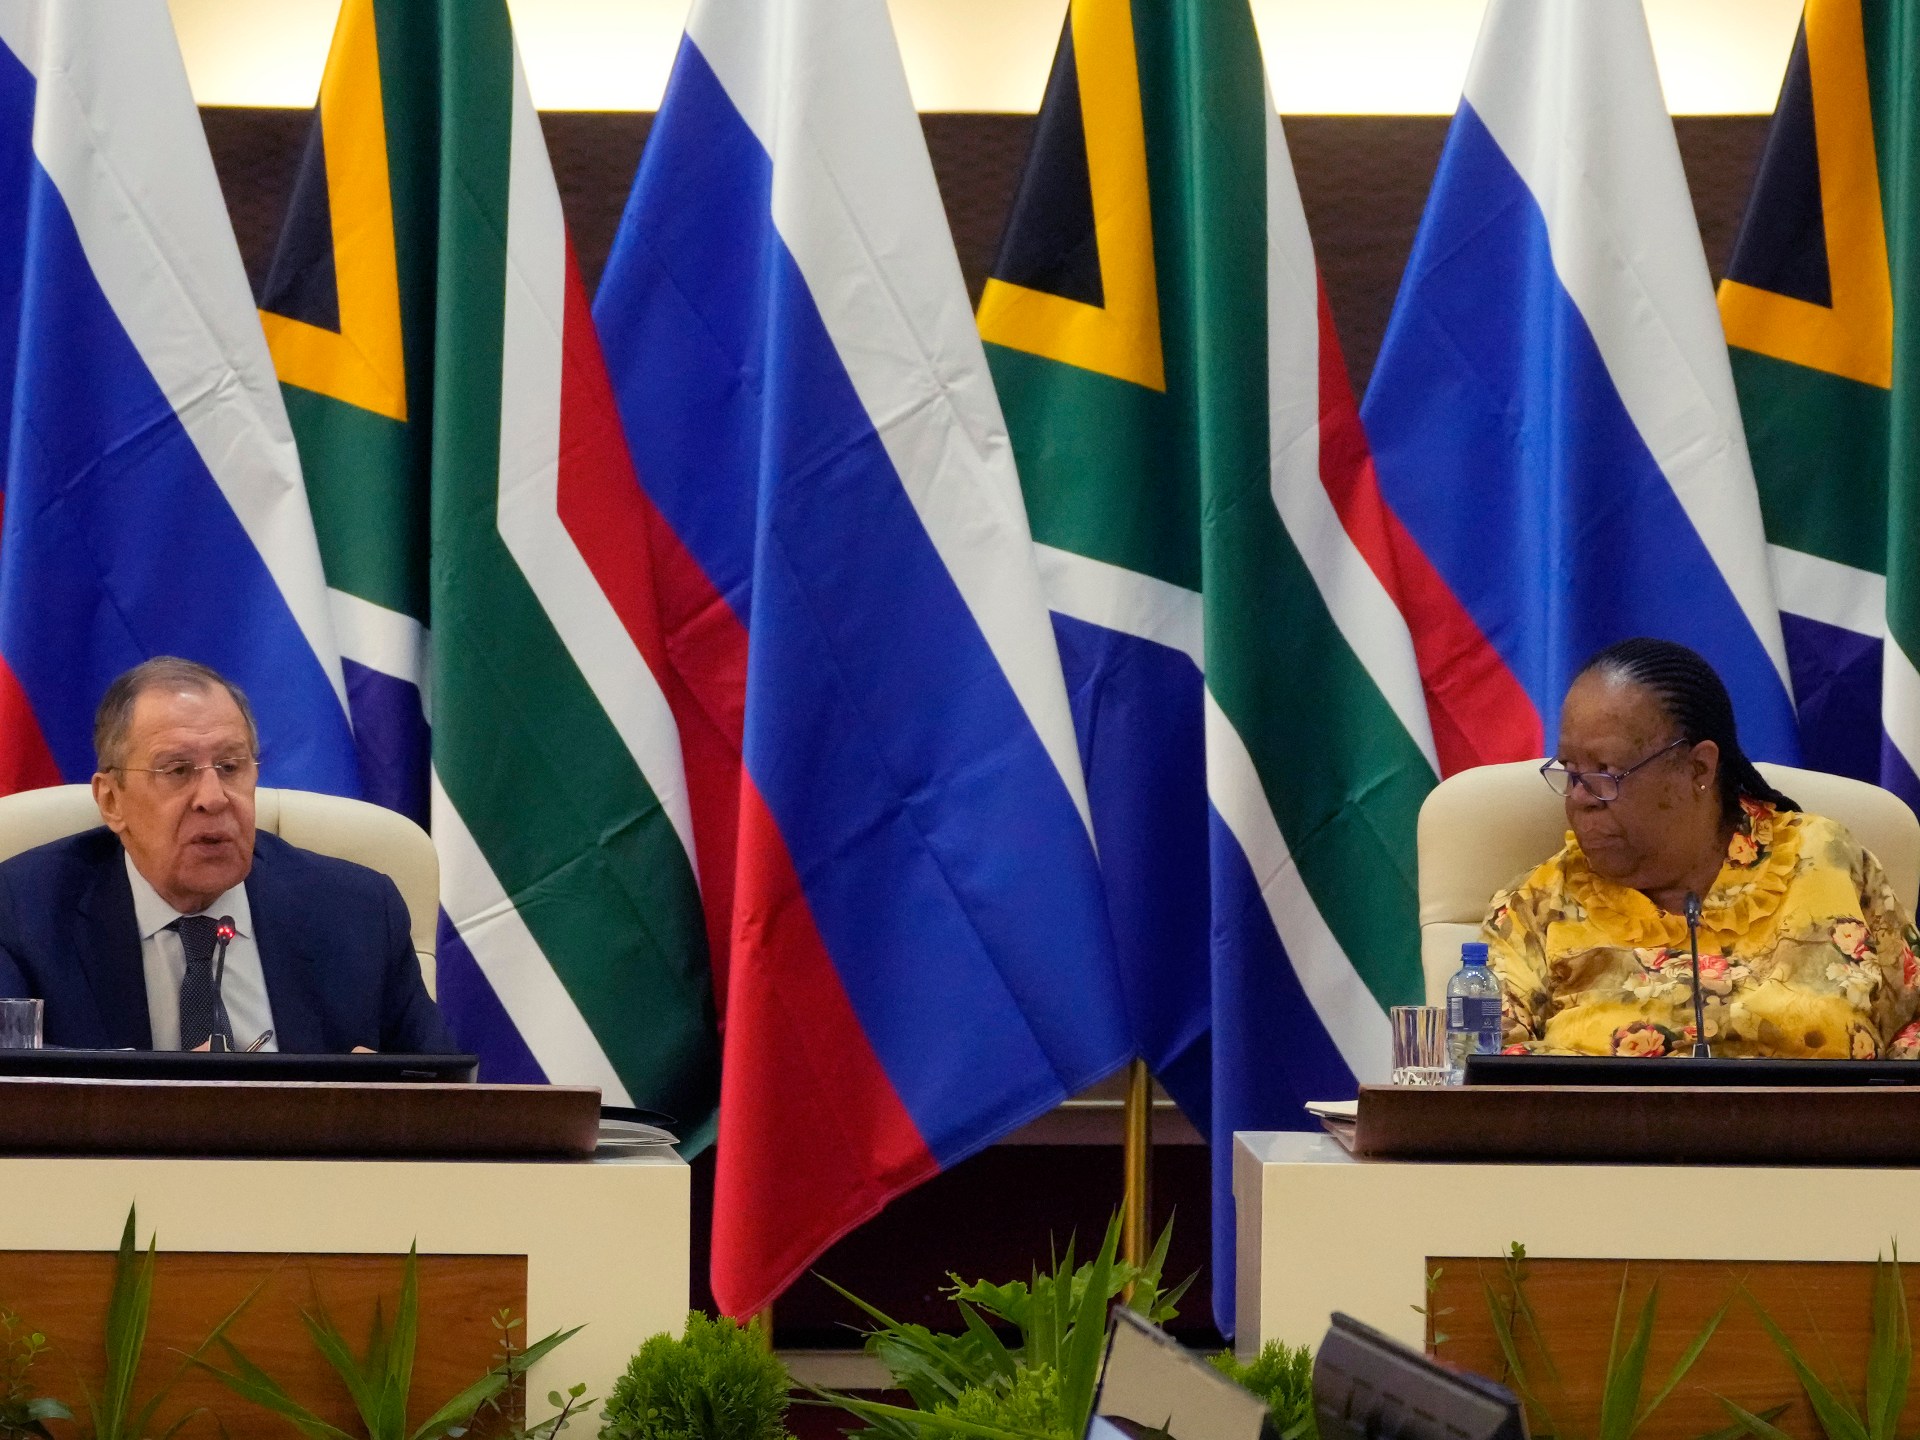 Is South Africa’s foreign policy contradictory or a balancing act?